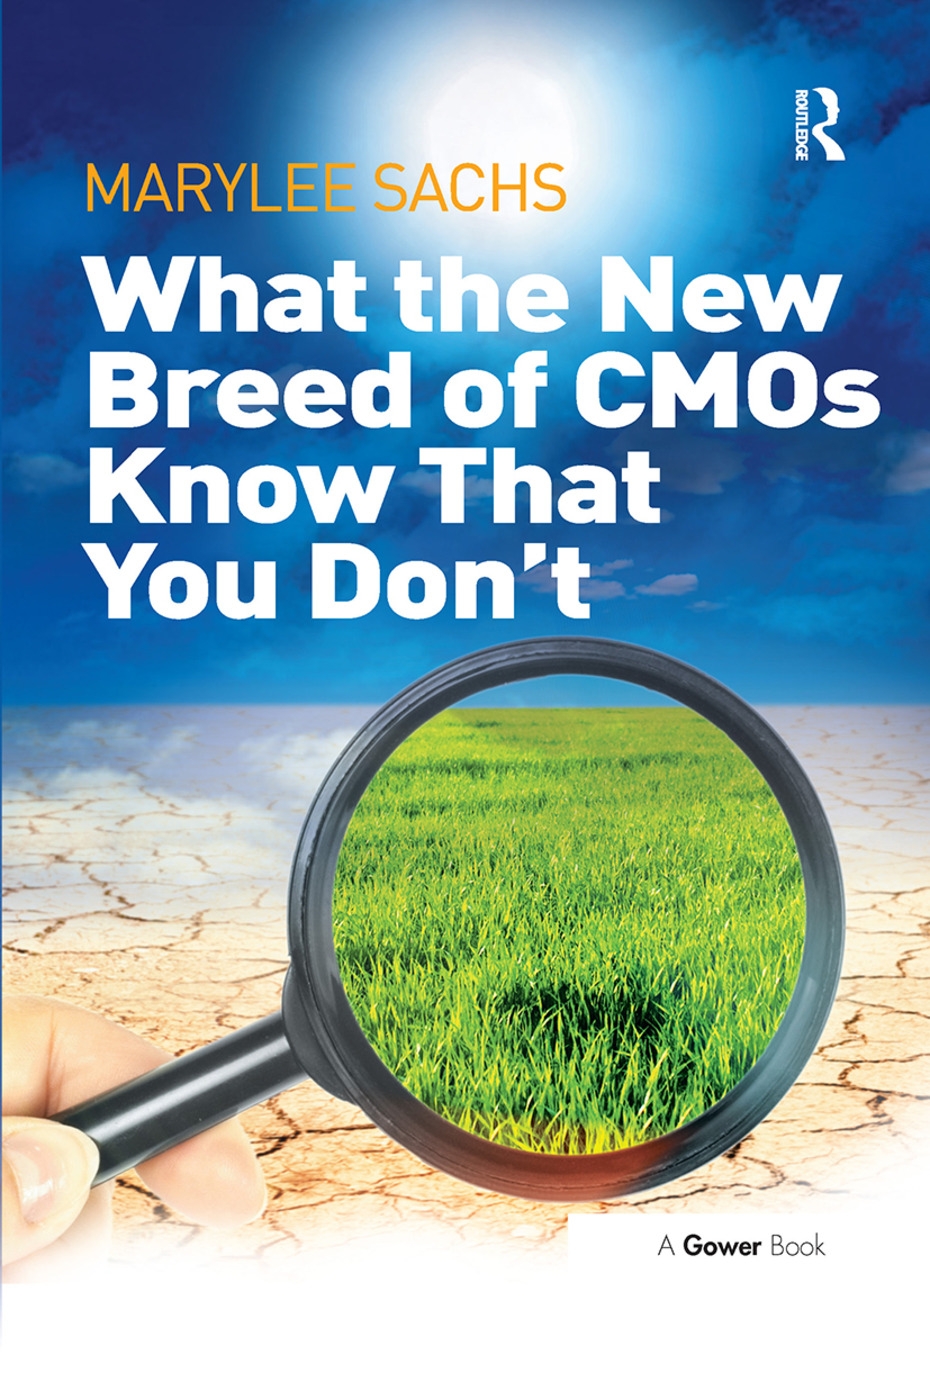 What the New Breed of CMOs Know That You Don’t